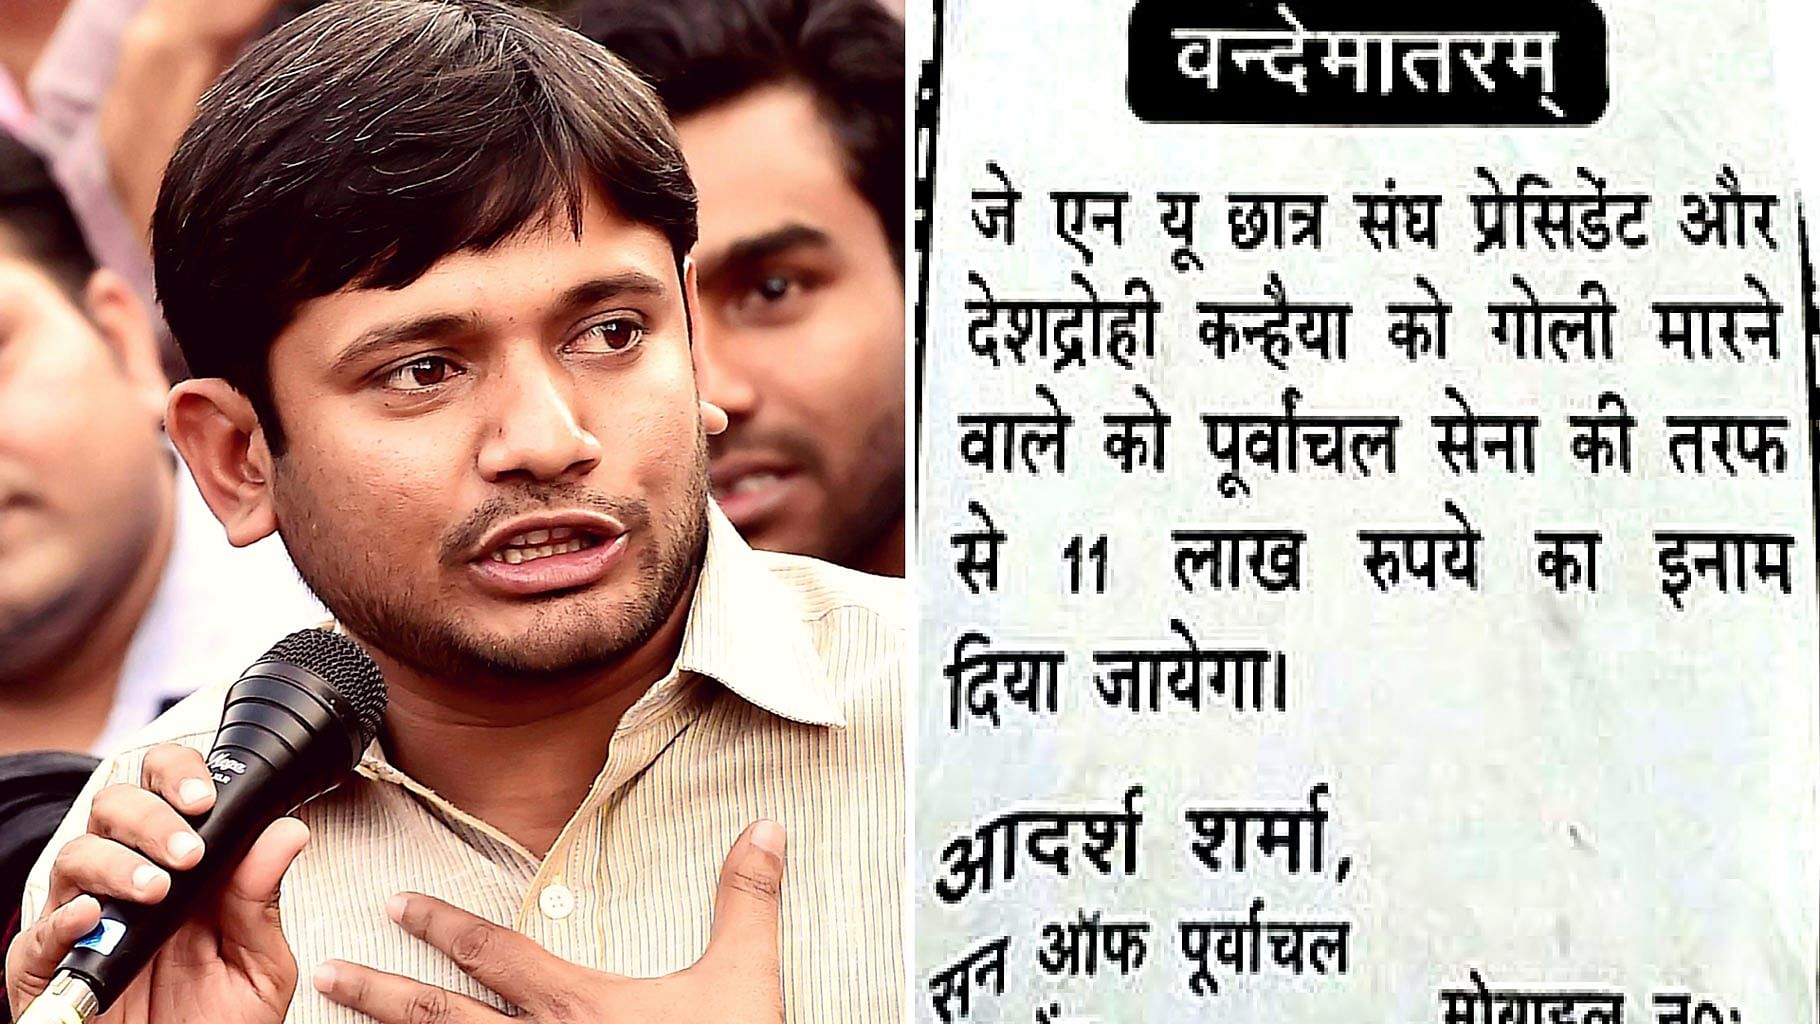 A poster offering a reward to whoever shoots Kanhaiya Kumar surfaced in central Delhi on Saturday. (Photo: PTI/Altered by <b>The Quint</b>)